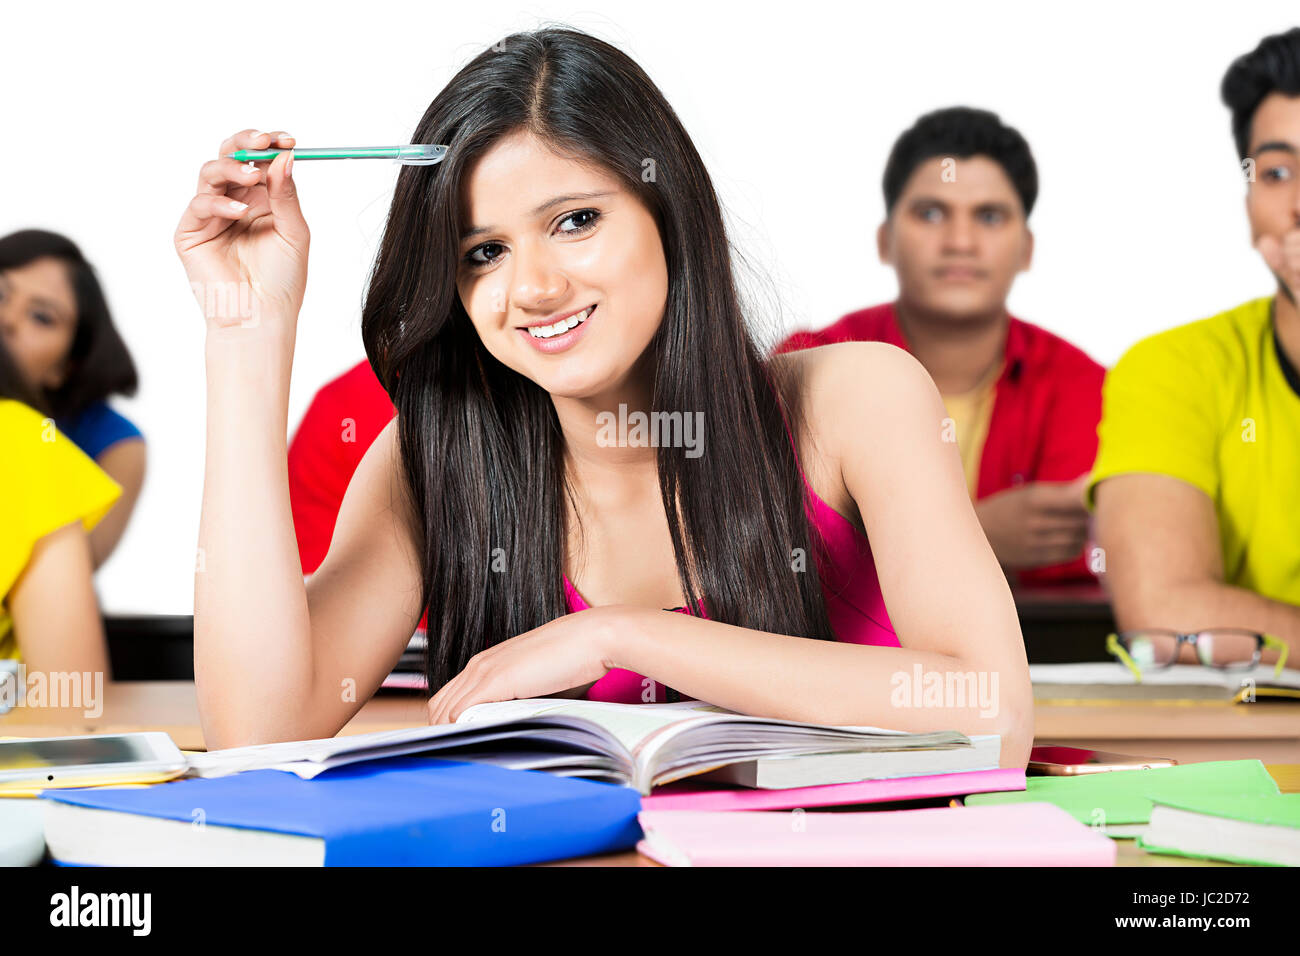 Indian College Girl Student Studying Classroom Education Stock Photo